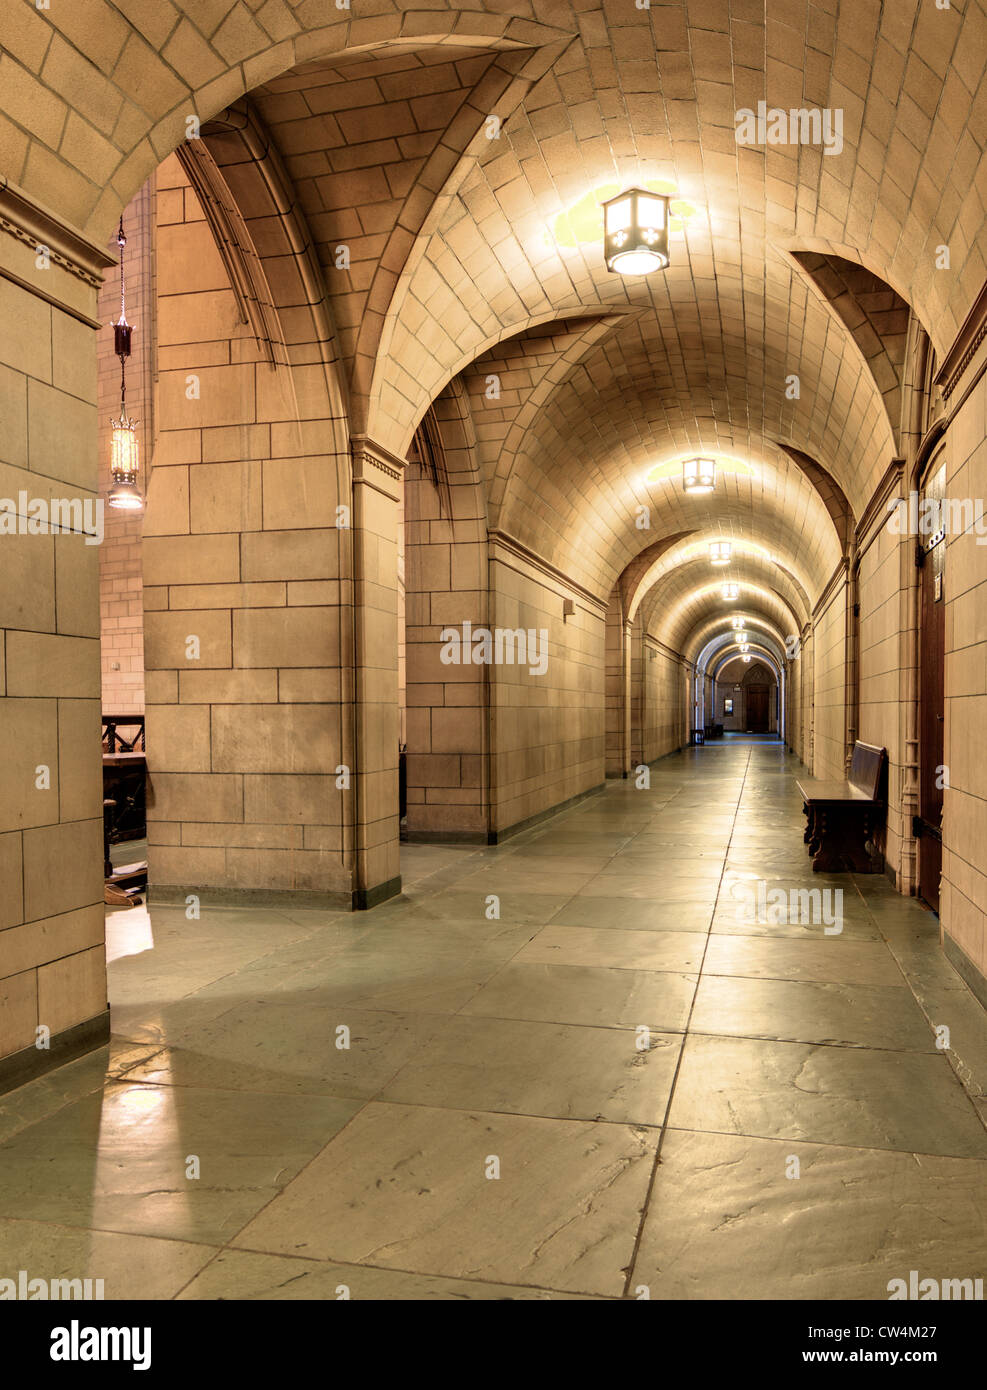 Hallway in the Cathedral of Learning at the University of Pittsburgh in Pennsylvania, USA. Stock Photo